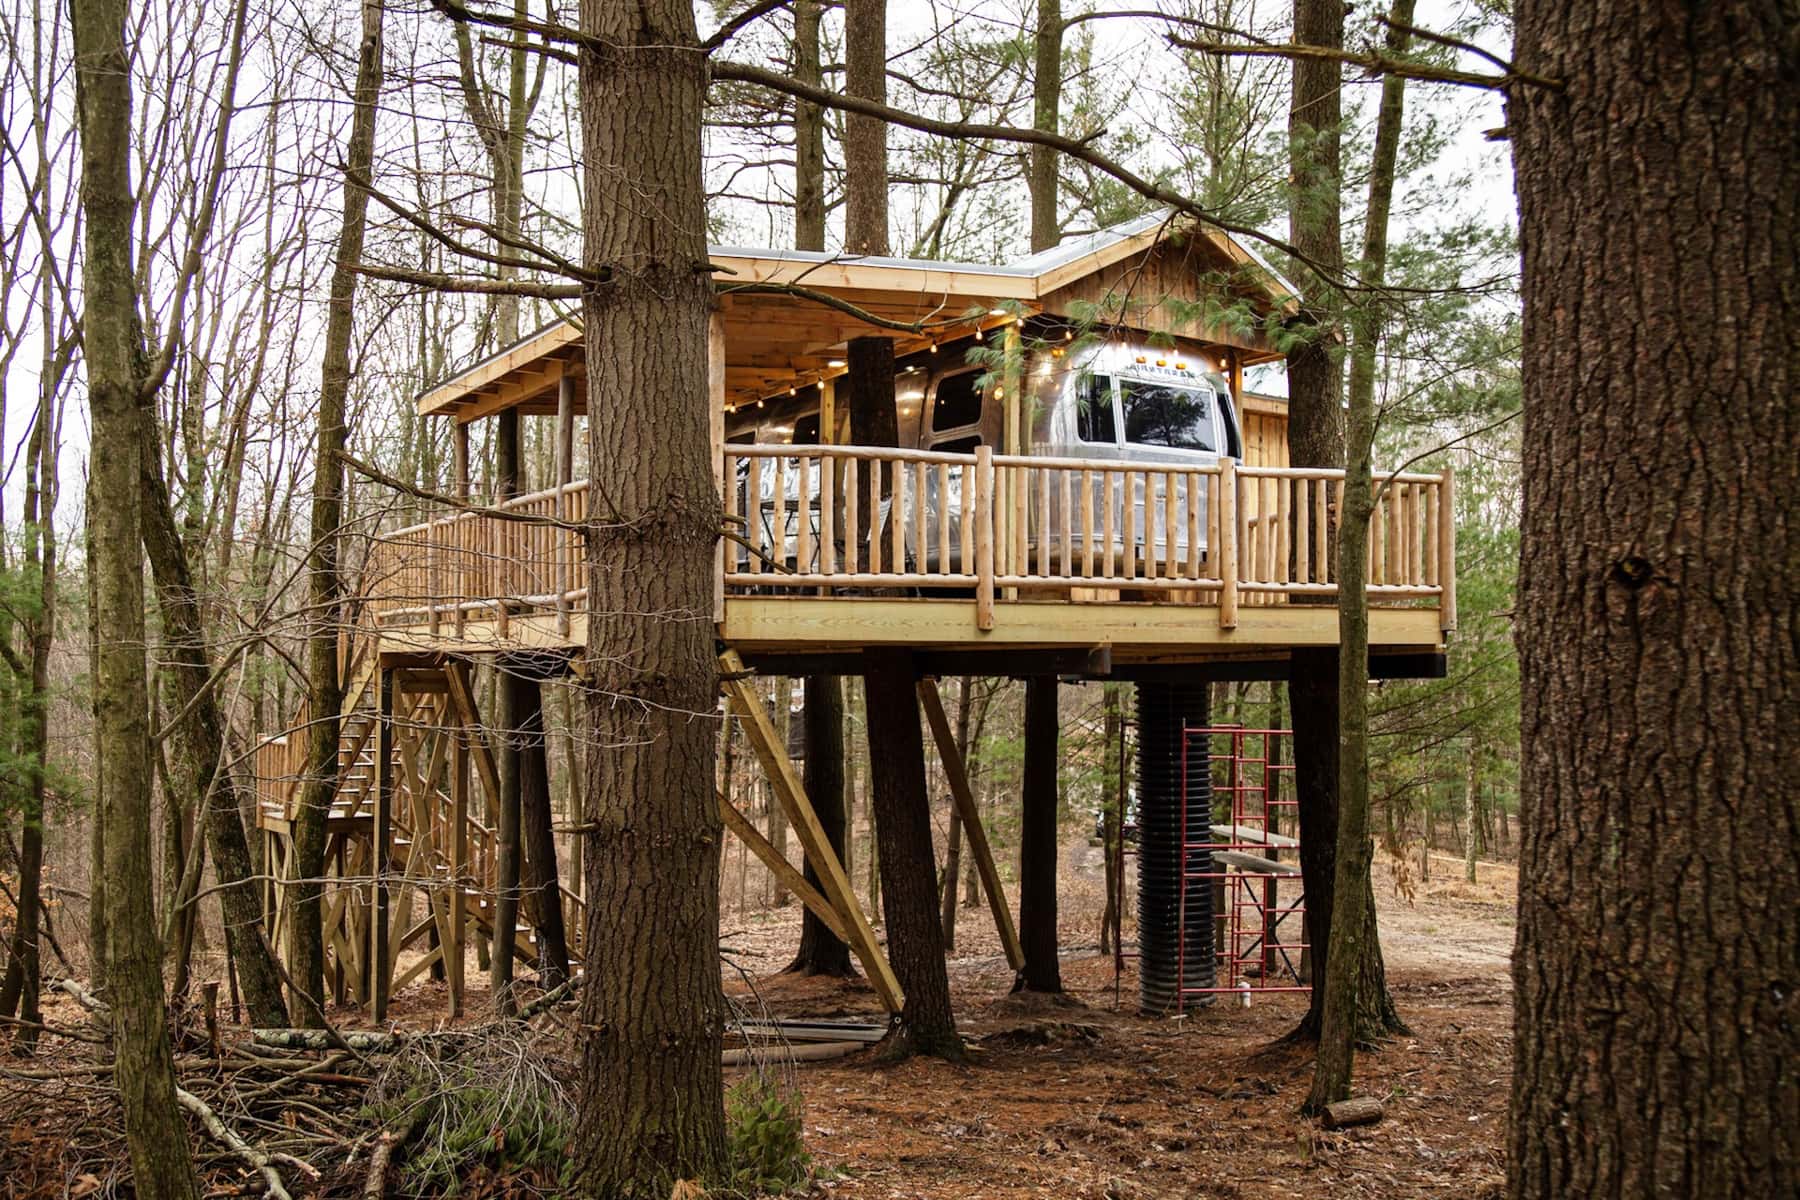 The Mohican Treehouse Resort Is one of several unusual accommodations. Photo by Chris McLelland@Mohican Media